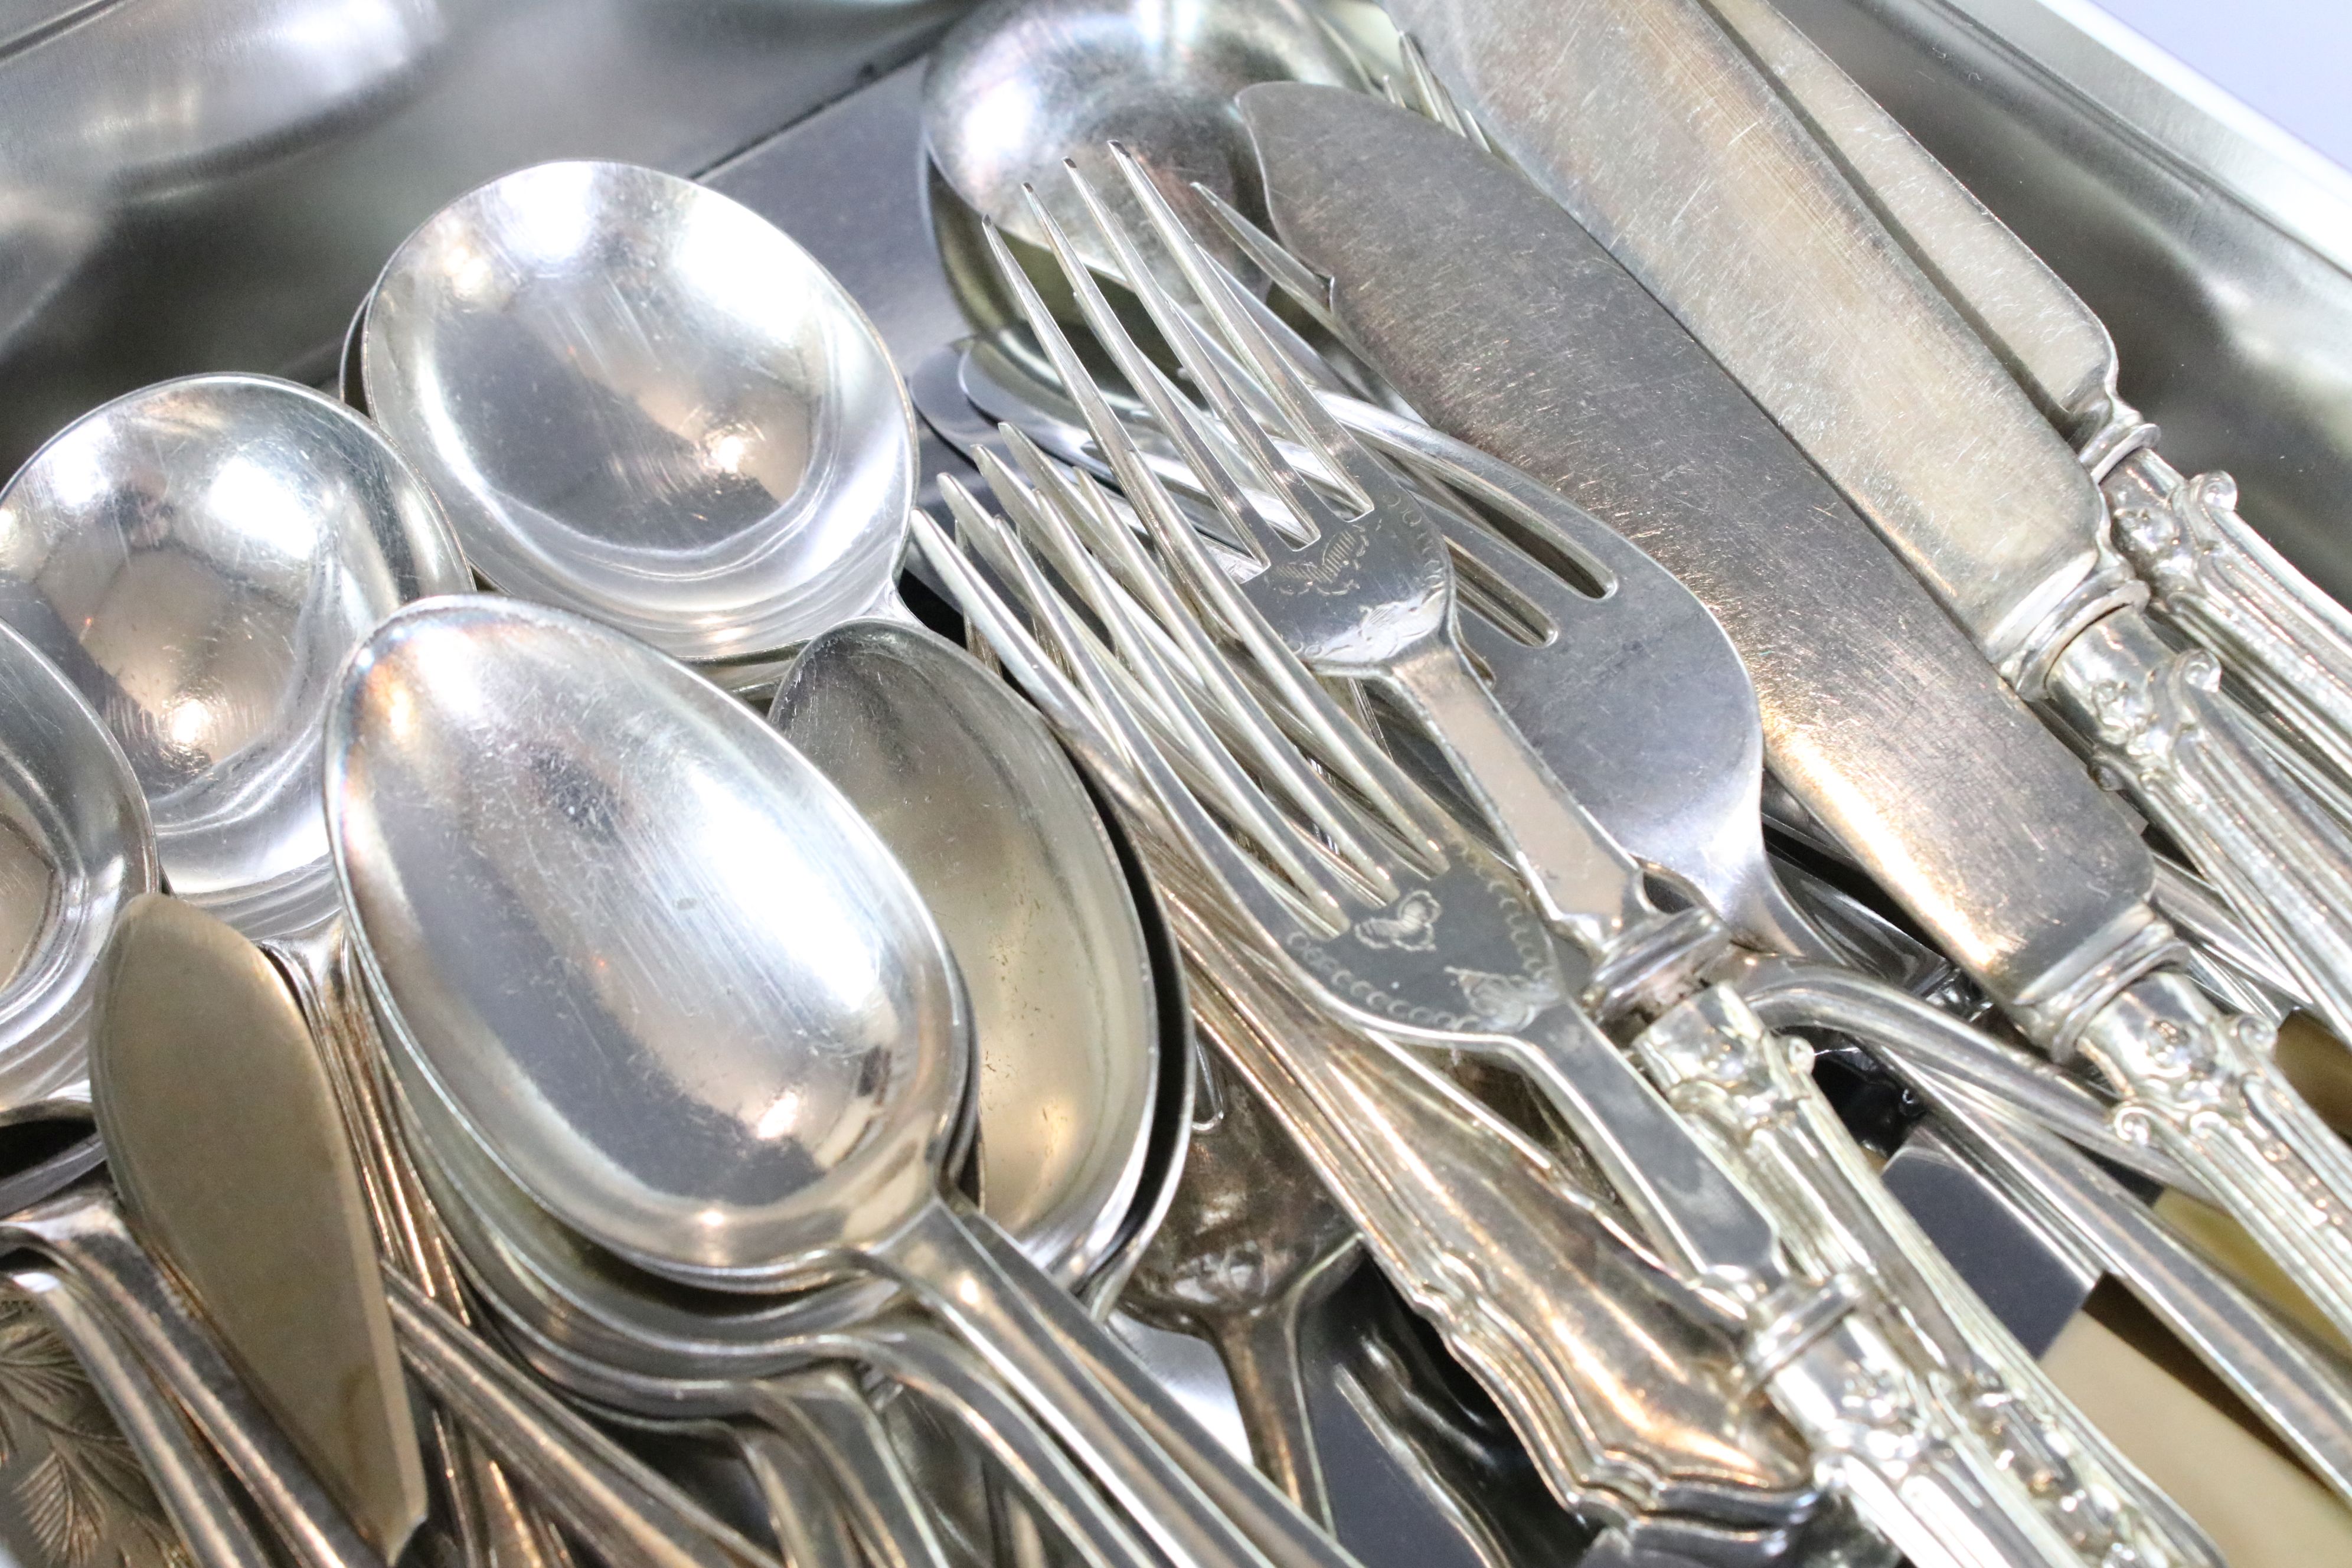 A small collection of silver plated flat ware / cutlery to include fish knives, forks and spoons. - Image 4 of 5